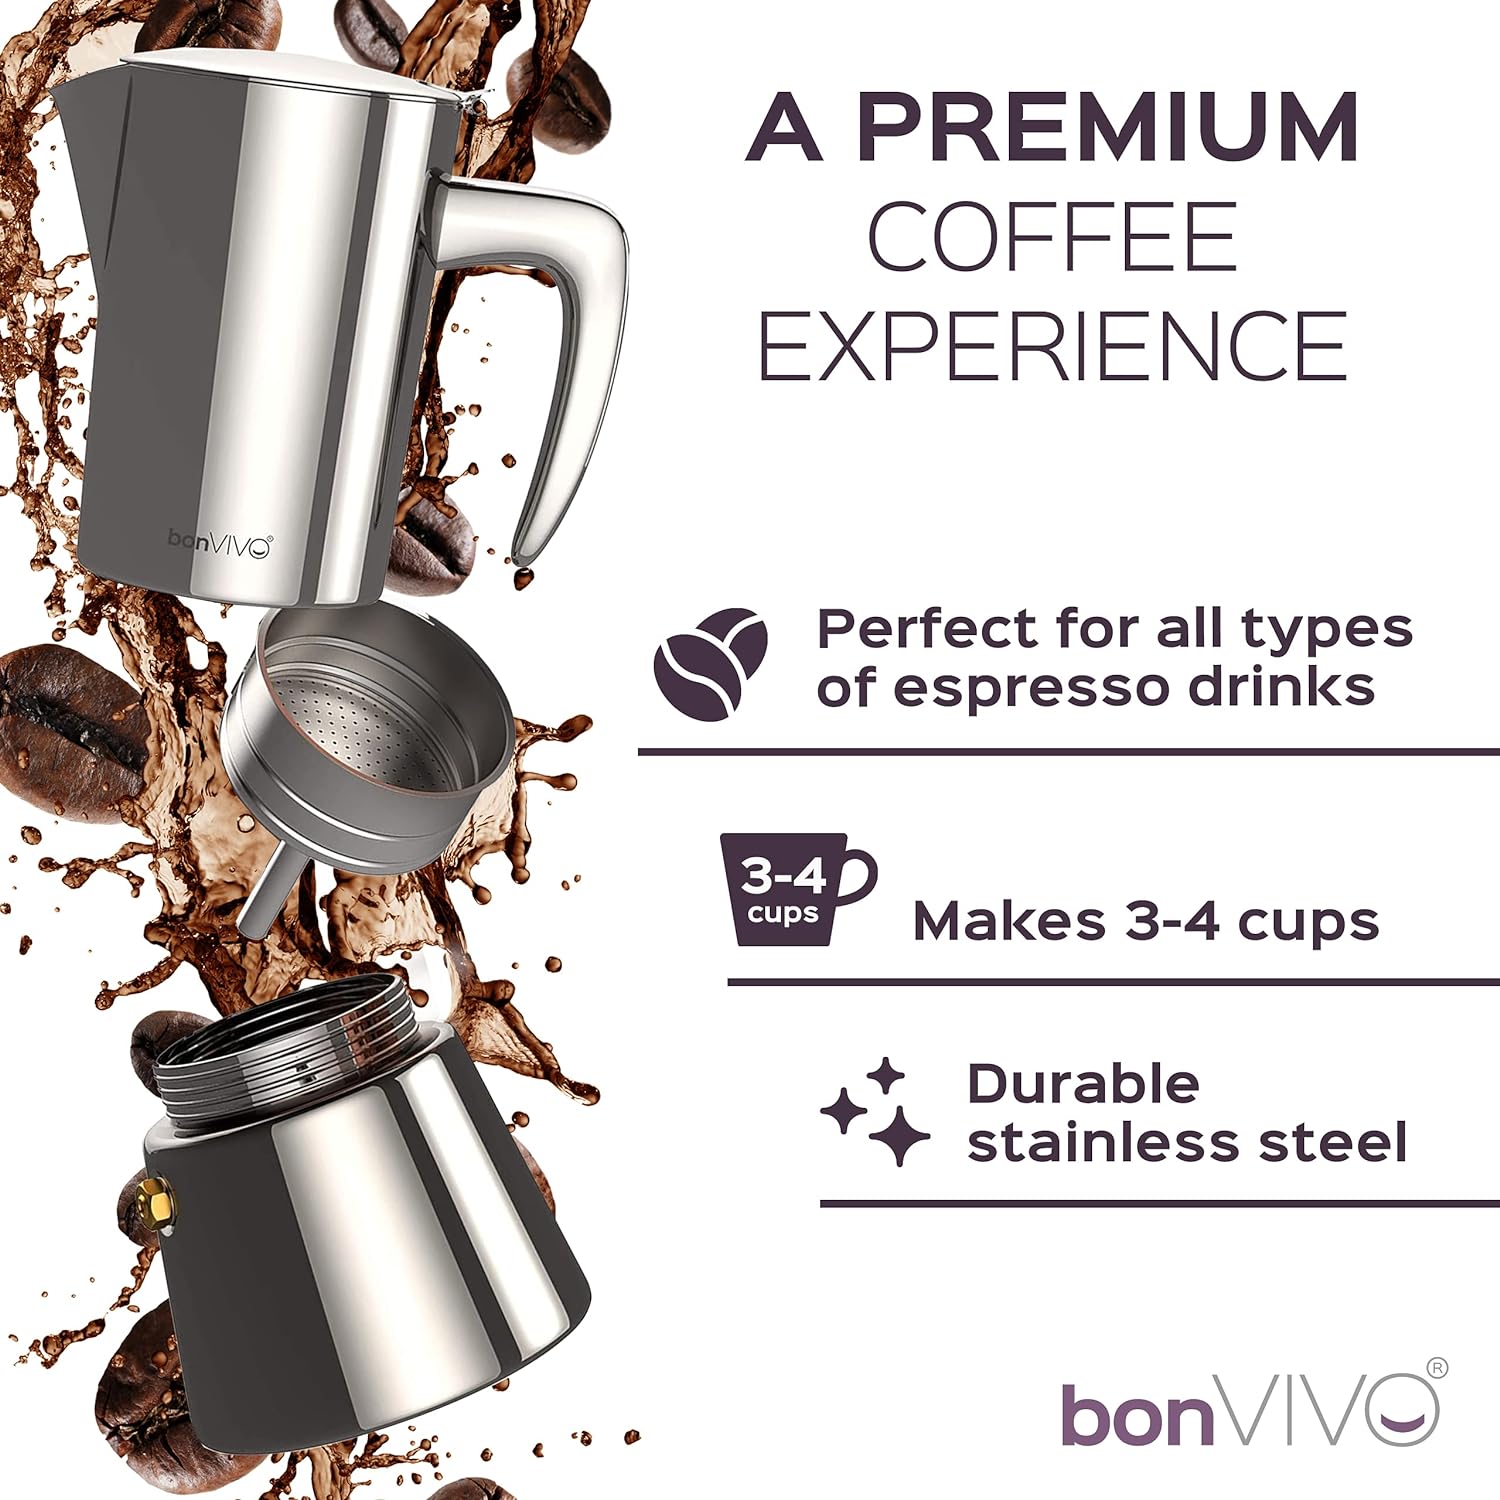 bonVIVO Intenca Stovetop Espresso Maker - Luxurious, Stainless Steel Italian Coffee Maker for Camping or Home Use - Makes 6 Cups of Full-Bodied Coffee - Copper, 10oz